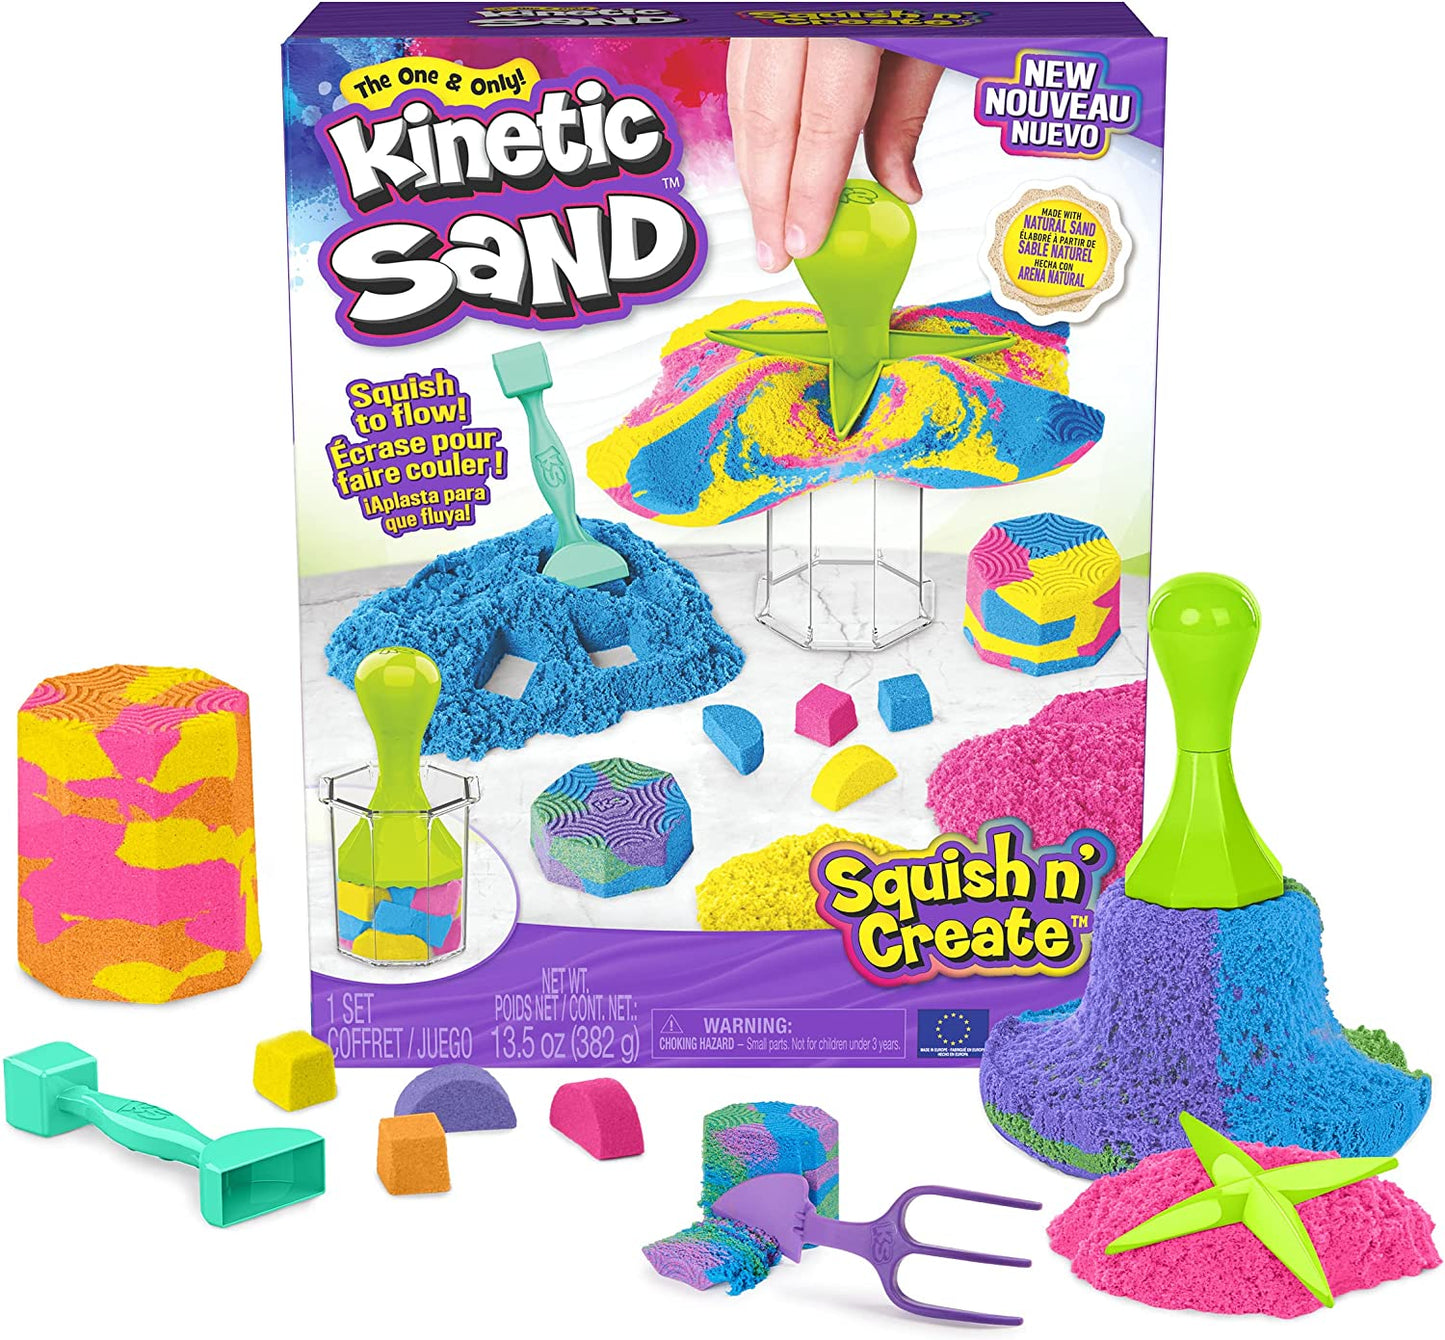 Kinetic Sand , The Original Moldable Sensory Play Sand Toys for Kids, Blue, 2 lb. Resealable Bag, Ages 3+